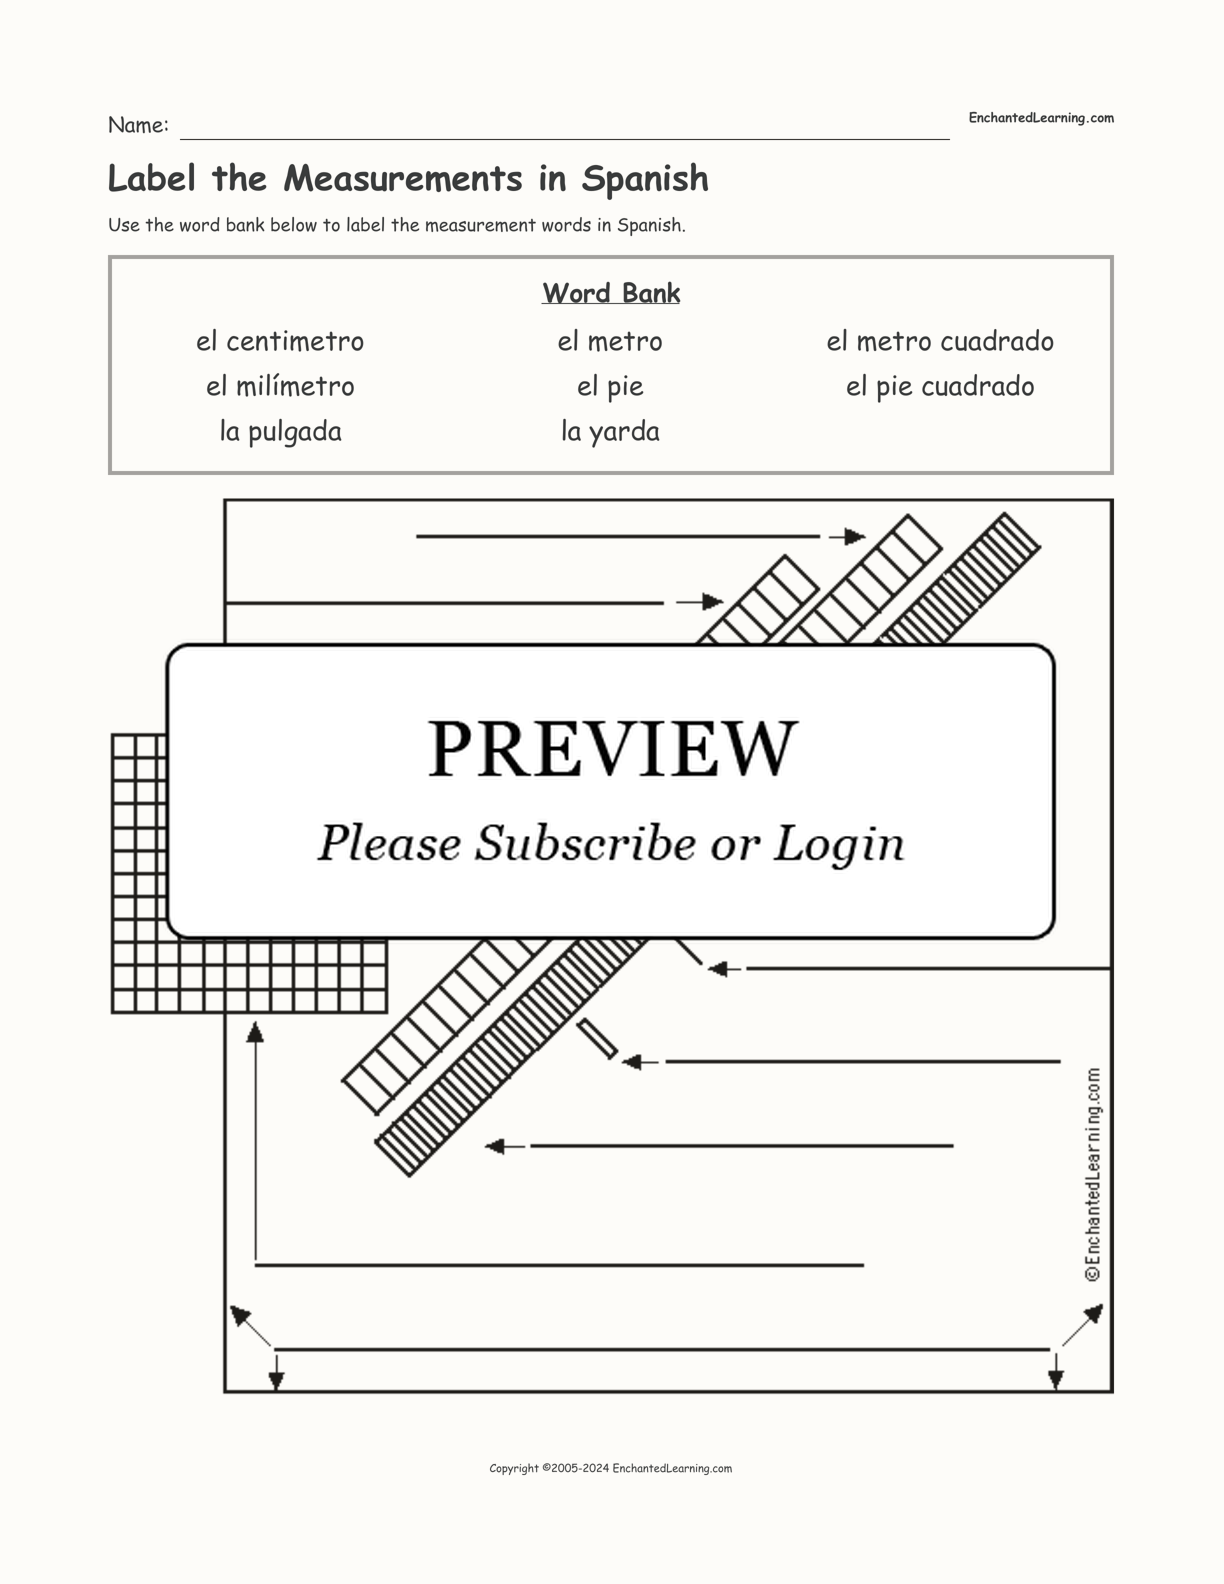 Label the Measurements in Spanish interactive worksheet page 1